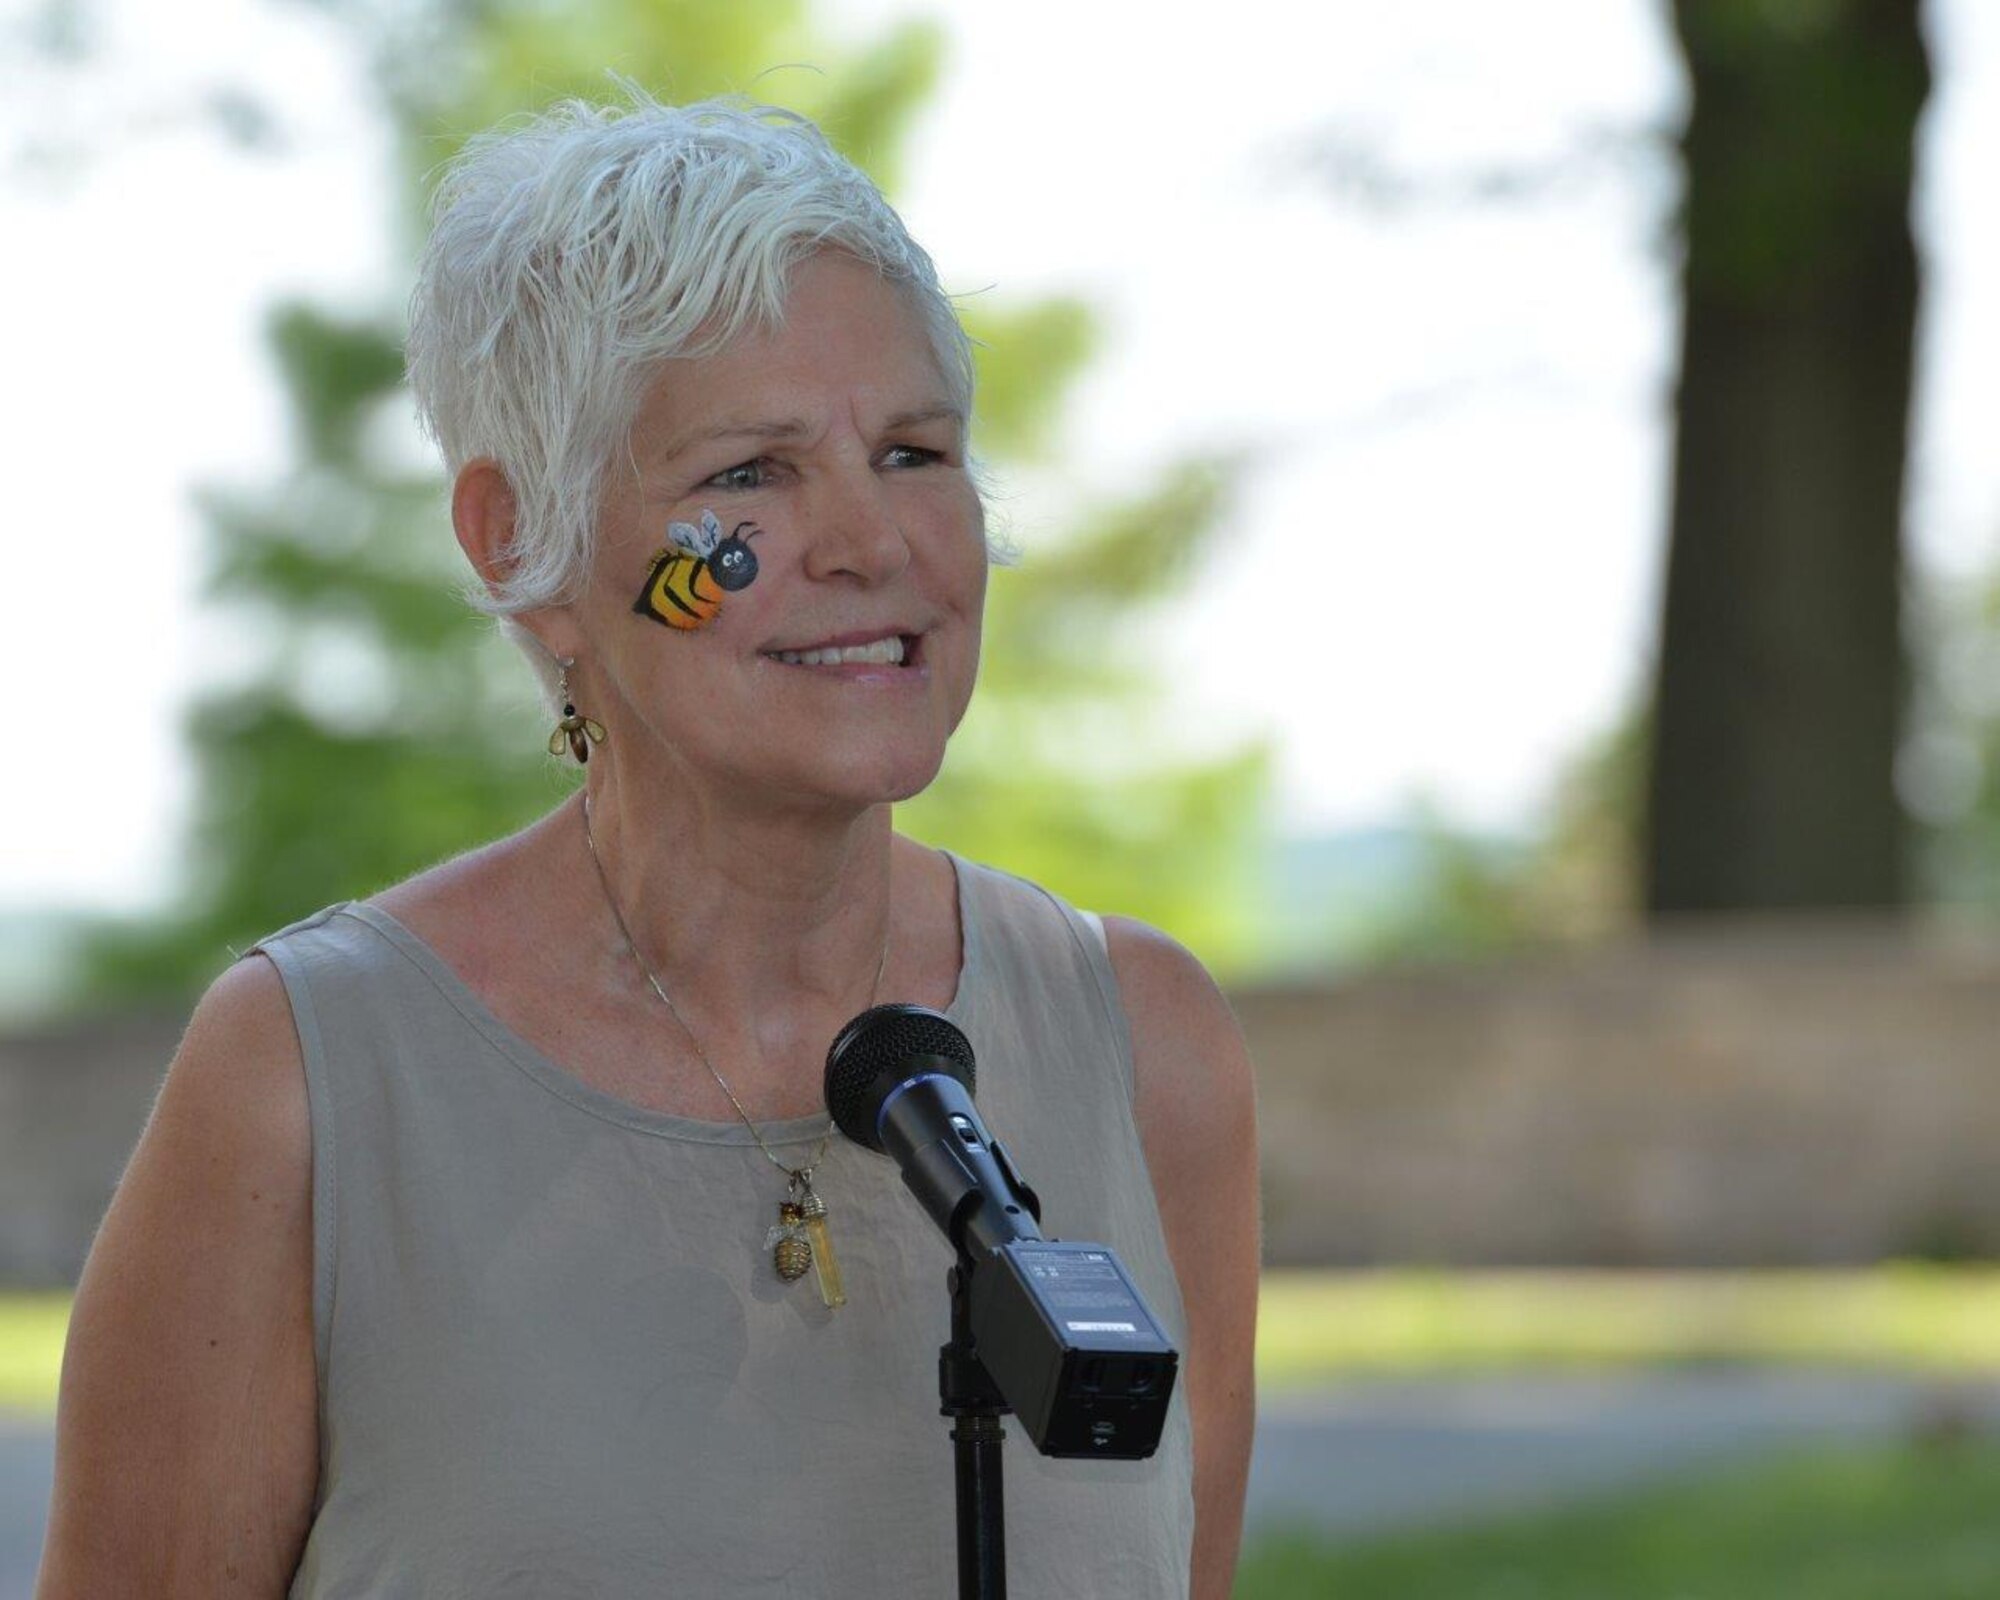 Phyllis Stiles, founder and director of Bee City USA, speaks at the Pollinator Expo held at the Wright Brothers Memorial located outside Wright-Patterson Air Force Base June 21. Stiles was named the North American Pollinator Protection Campaign’s United States’ PollinatorAdvocate of the Year for 2015. (U.S.Air Force photo/ Michelle Gigante)
